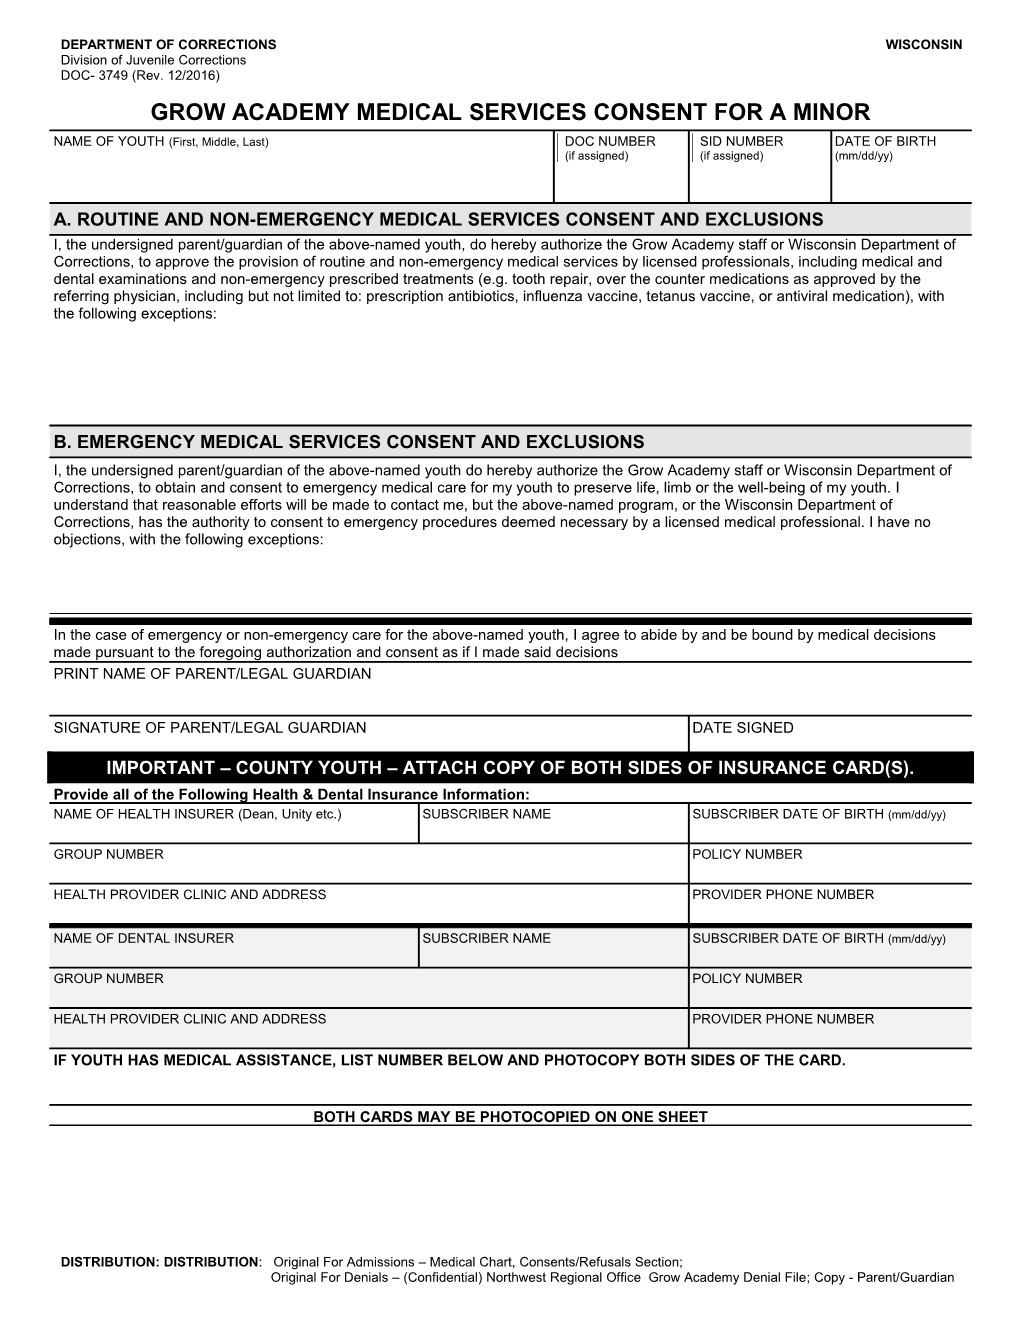 DOC-3749 GROW Academy Medical Services Consent for a Minor